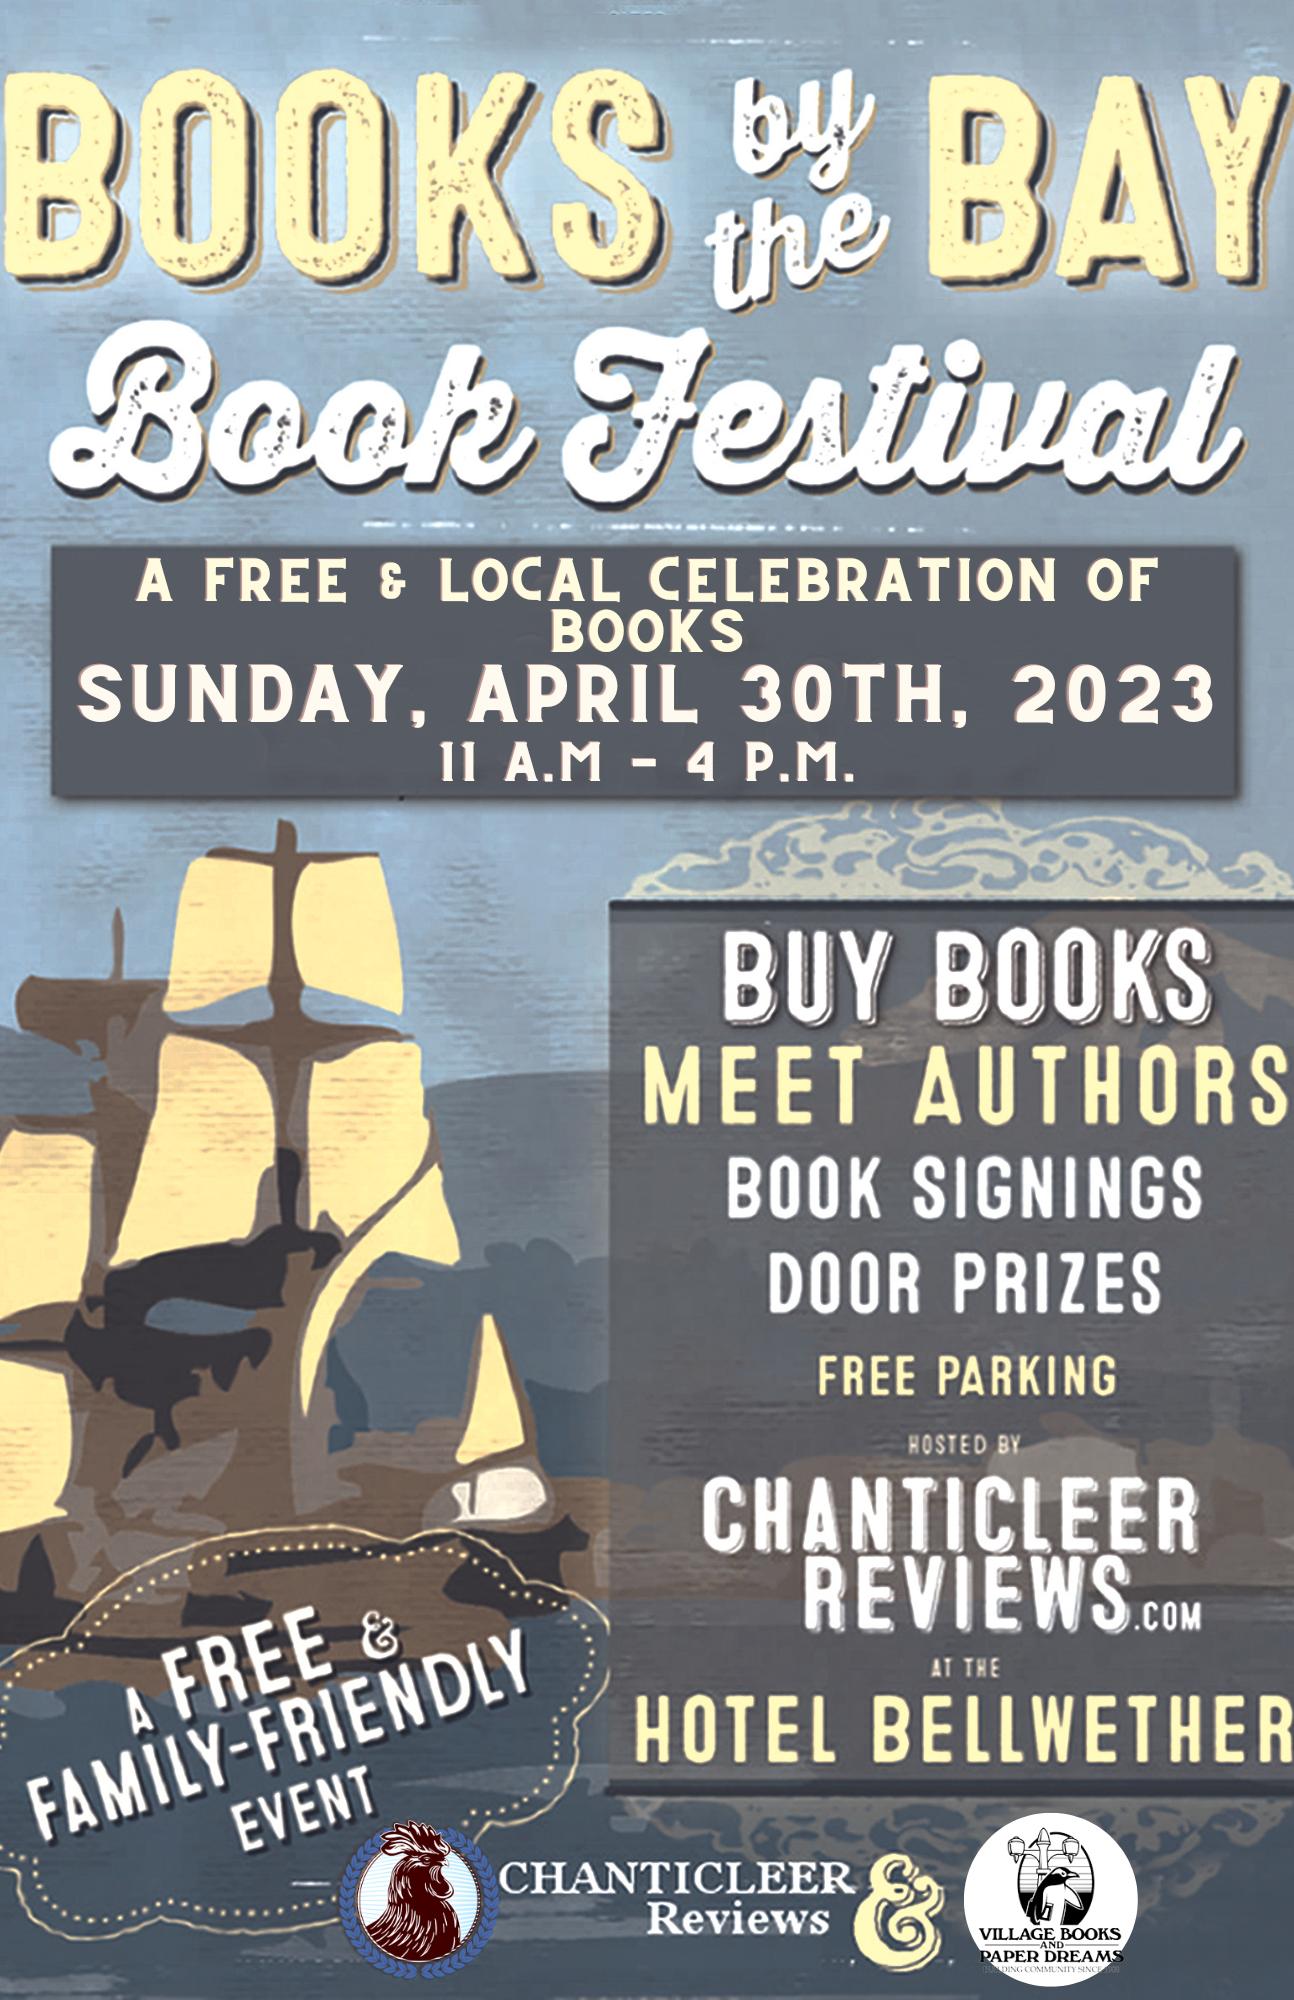 A ship on Bellingham Bay for the Books by the Bay Book Fair